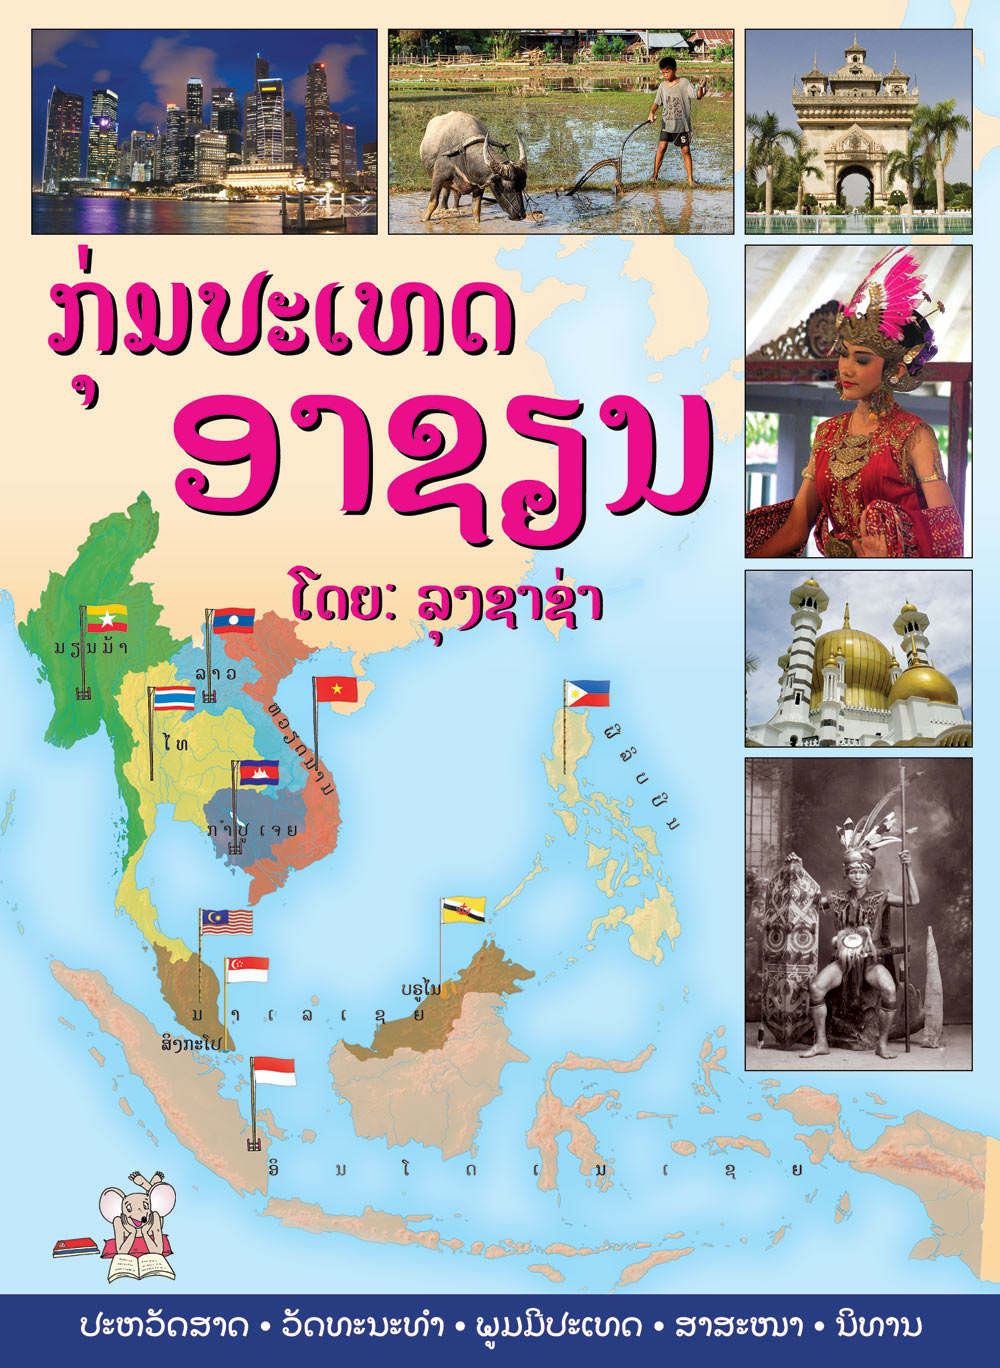 ASEAN countries large book cover, published in Lao language